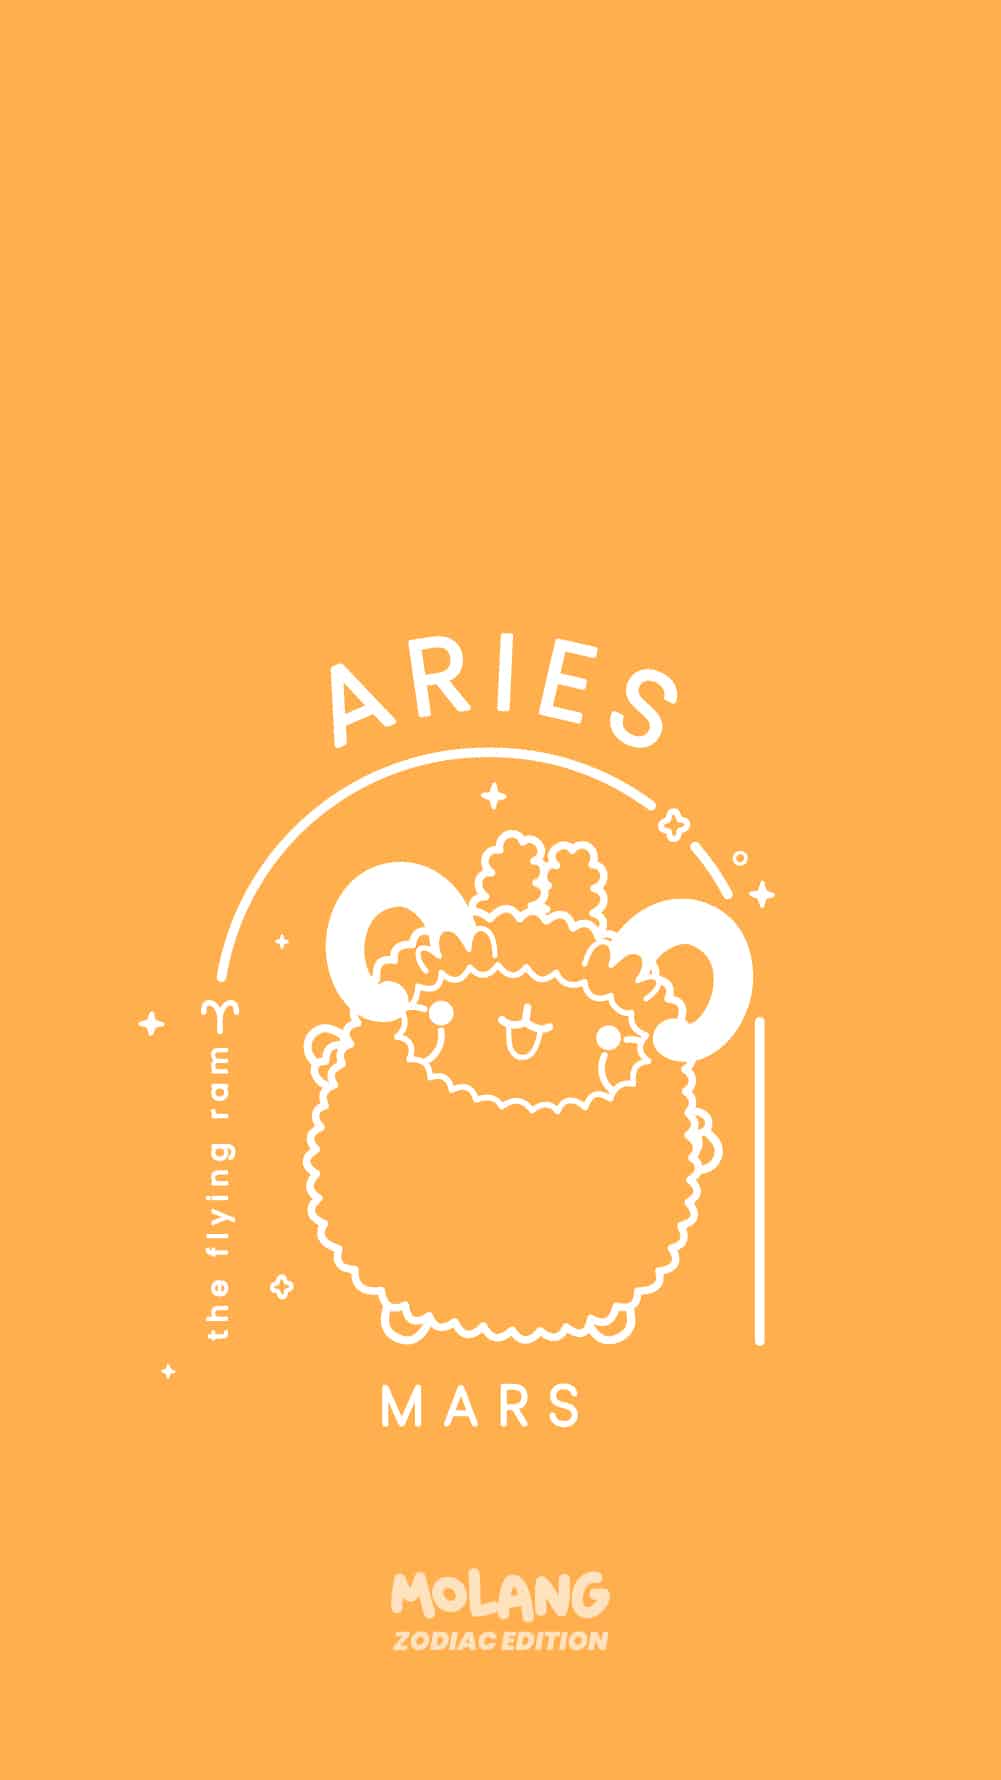 Aries Astrology Aesthetic wallpaper for phone iphone wallpaper and android  wallpaper  Aries aesthetic Aries wallpaper Aries astrology